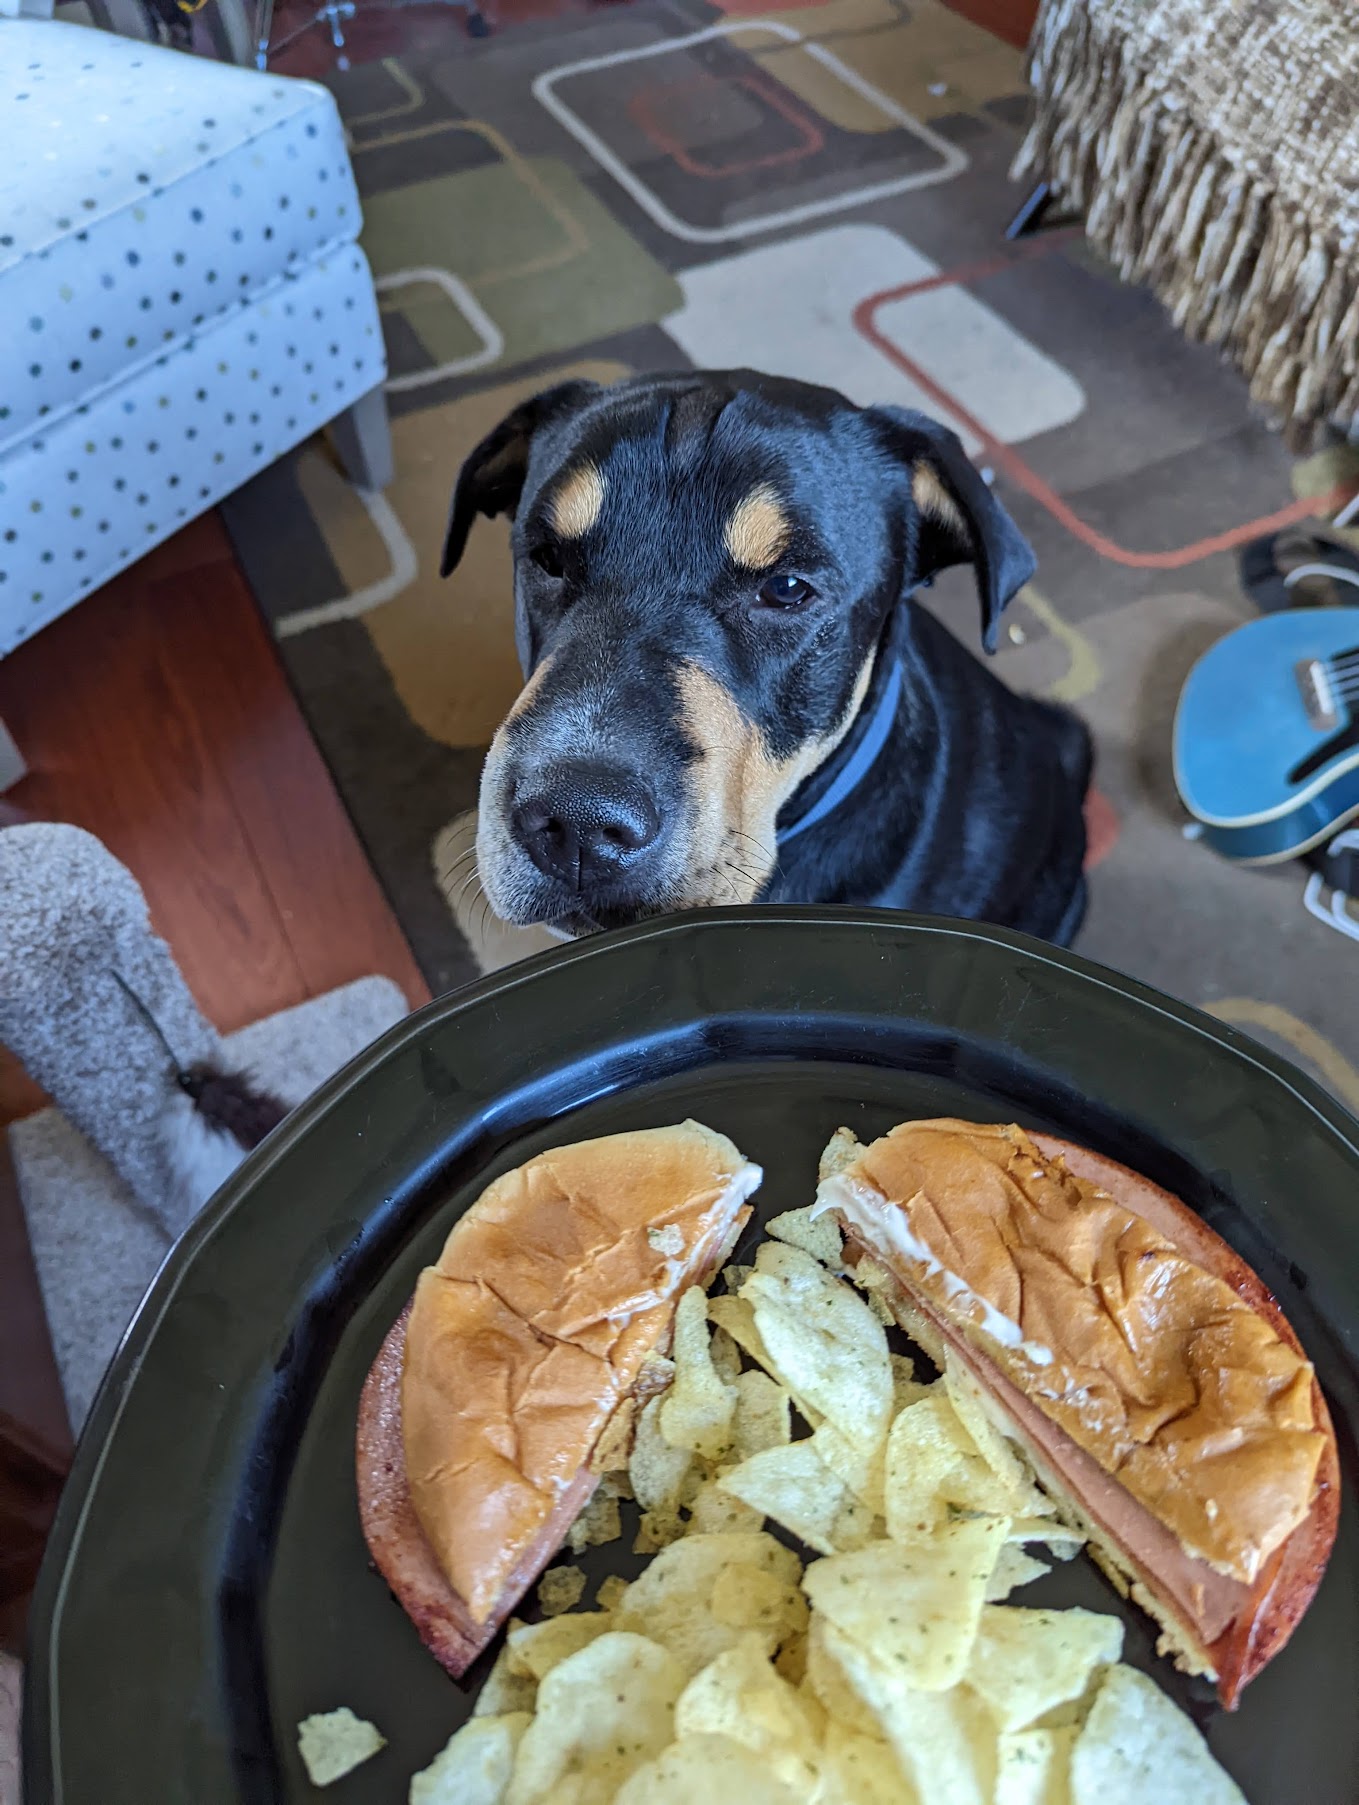 Charlie would very much like to sample the fried bologna, please. 